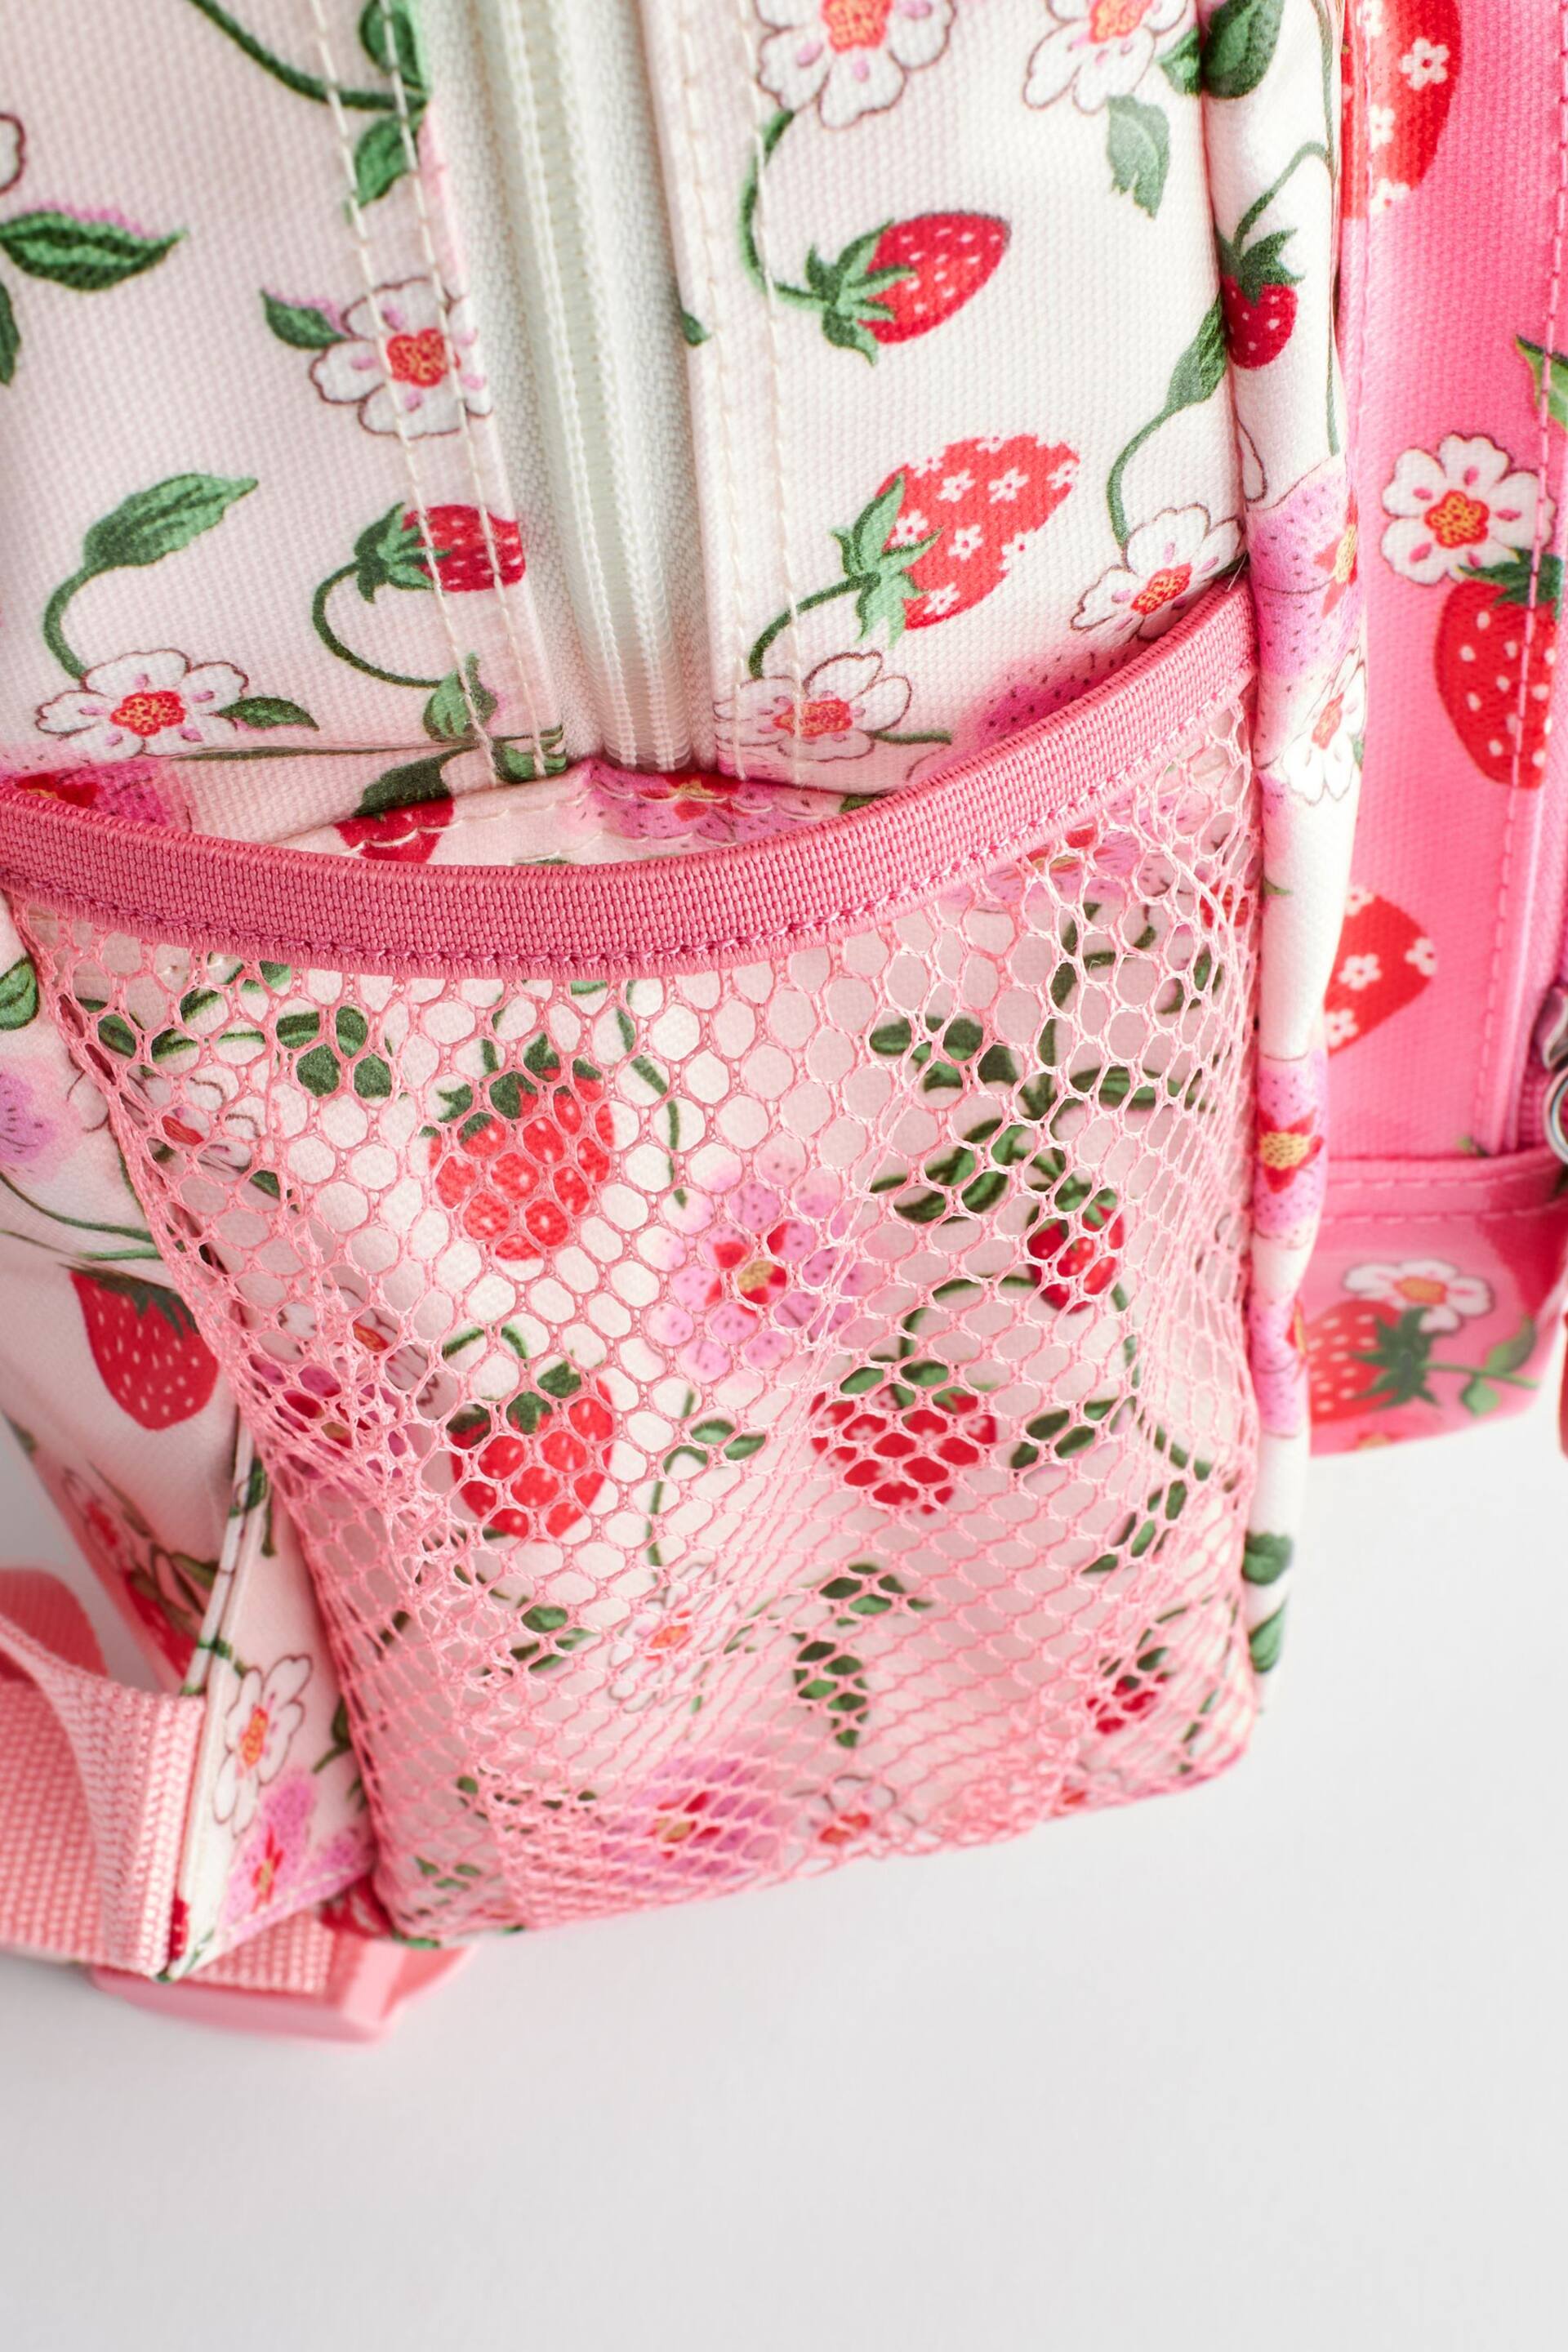 Cath Kidston Pink/White Floral Large Backpack - Image 7 of 12